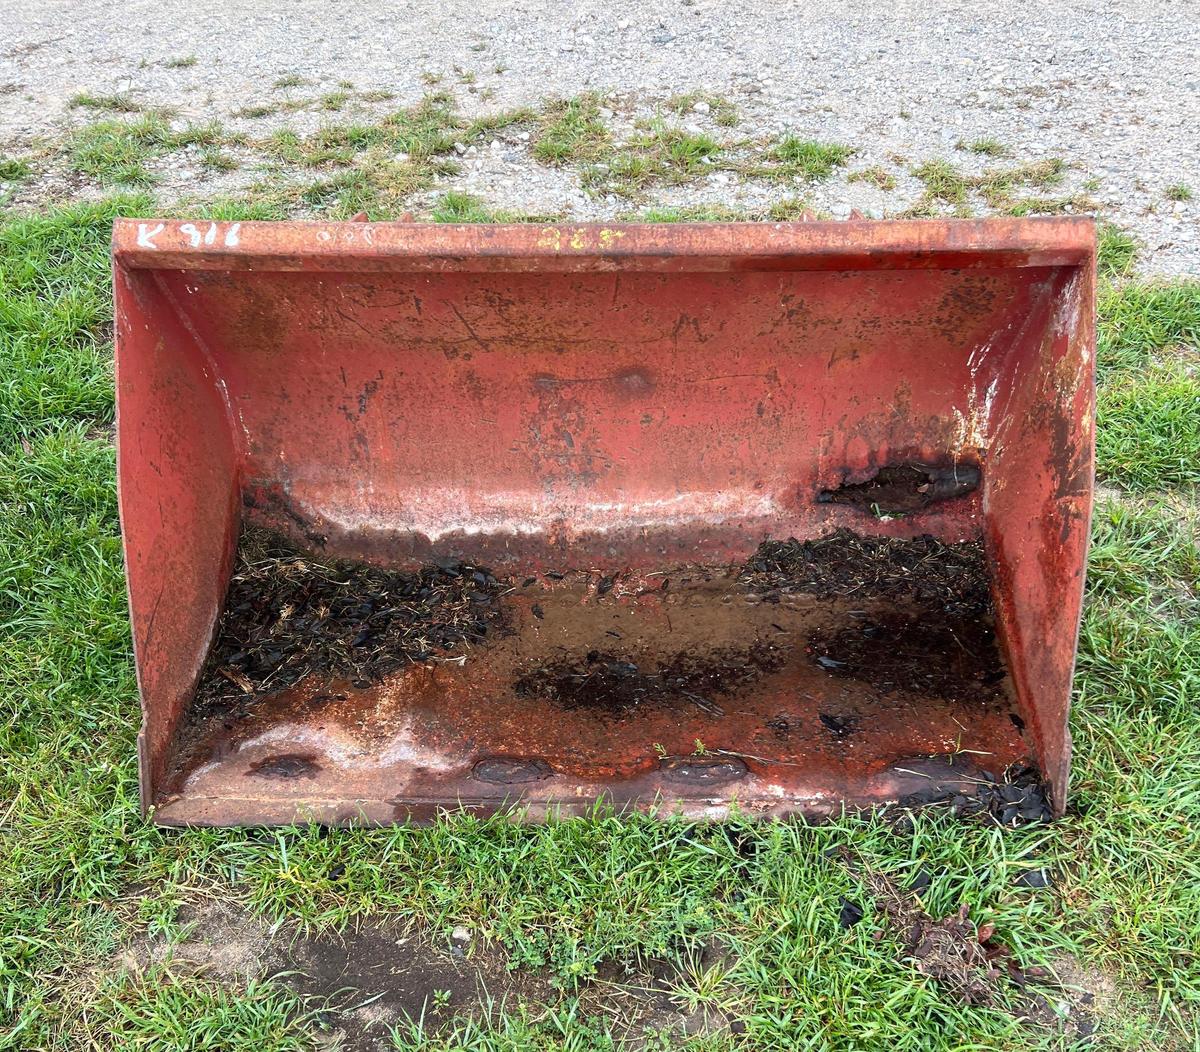 Tractor Bucket - Unsure what it fits